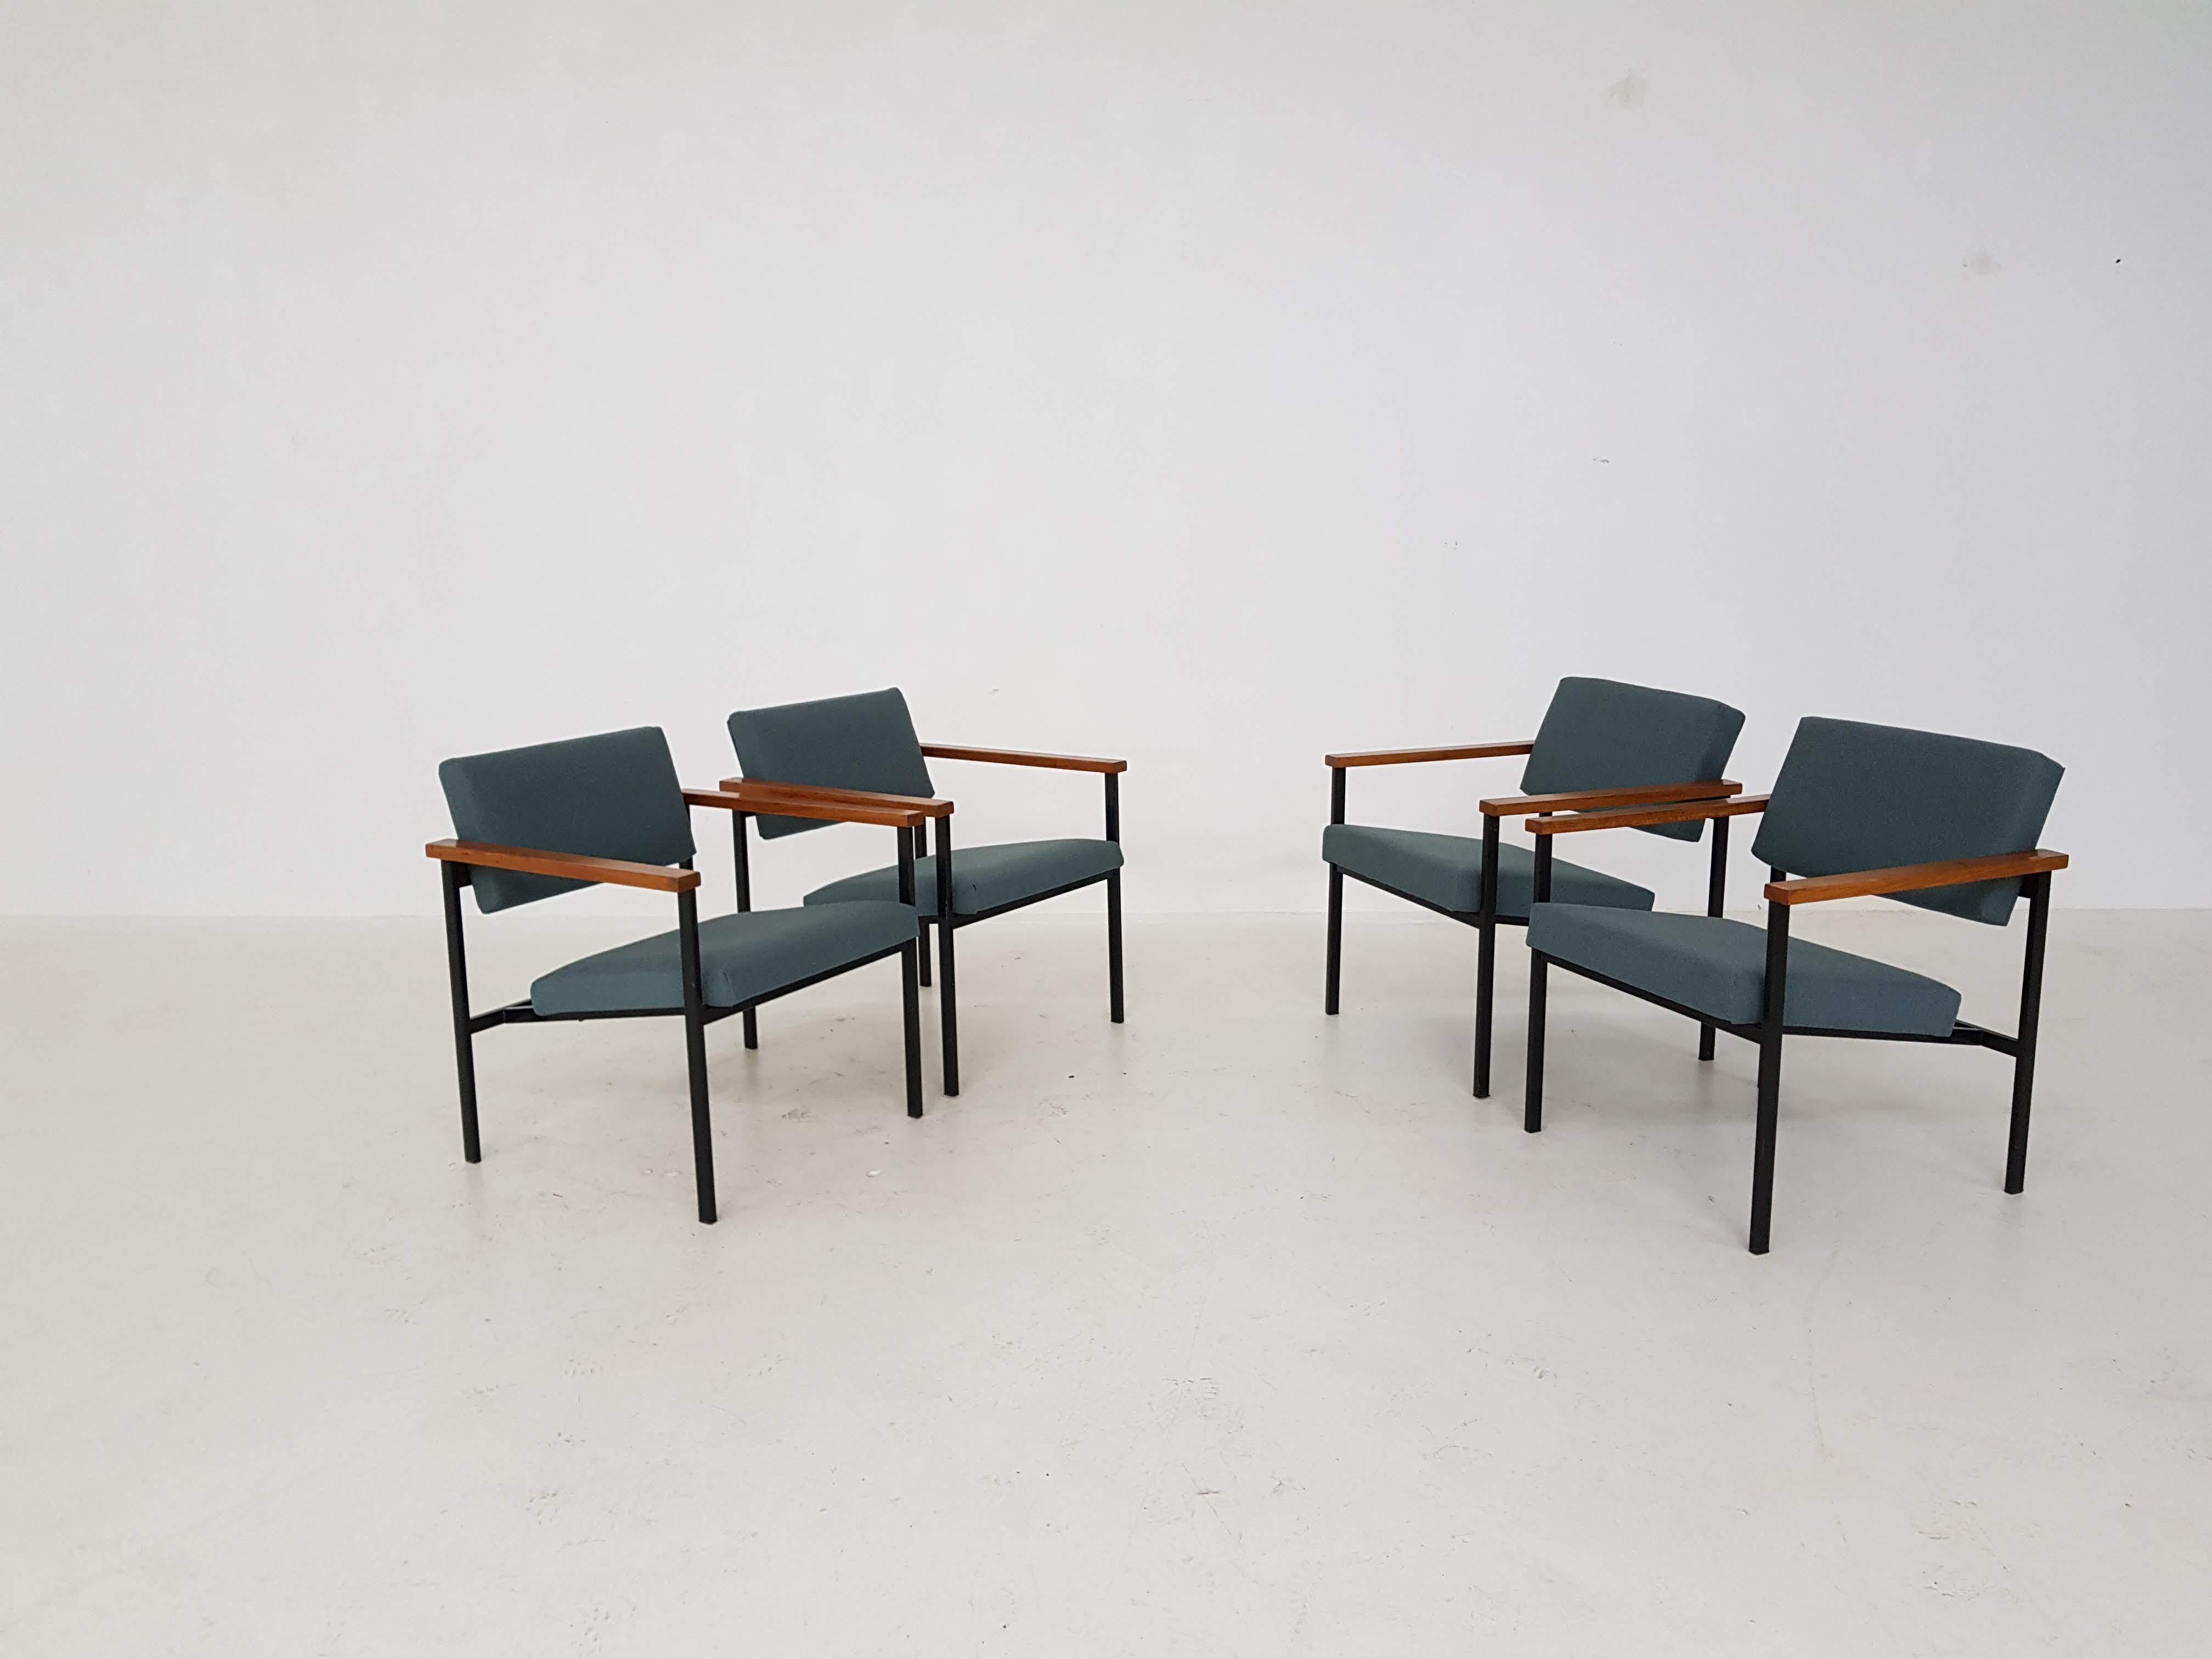 Metal Set of 4 Dutch Modernist Lounge Chairs, the Netherlands, 1960s